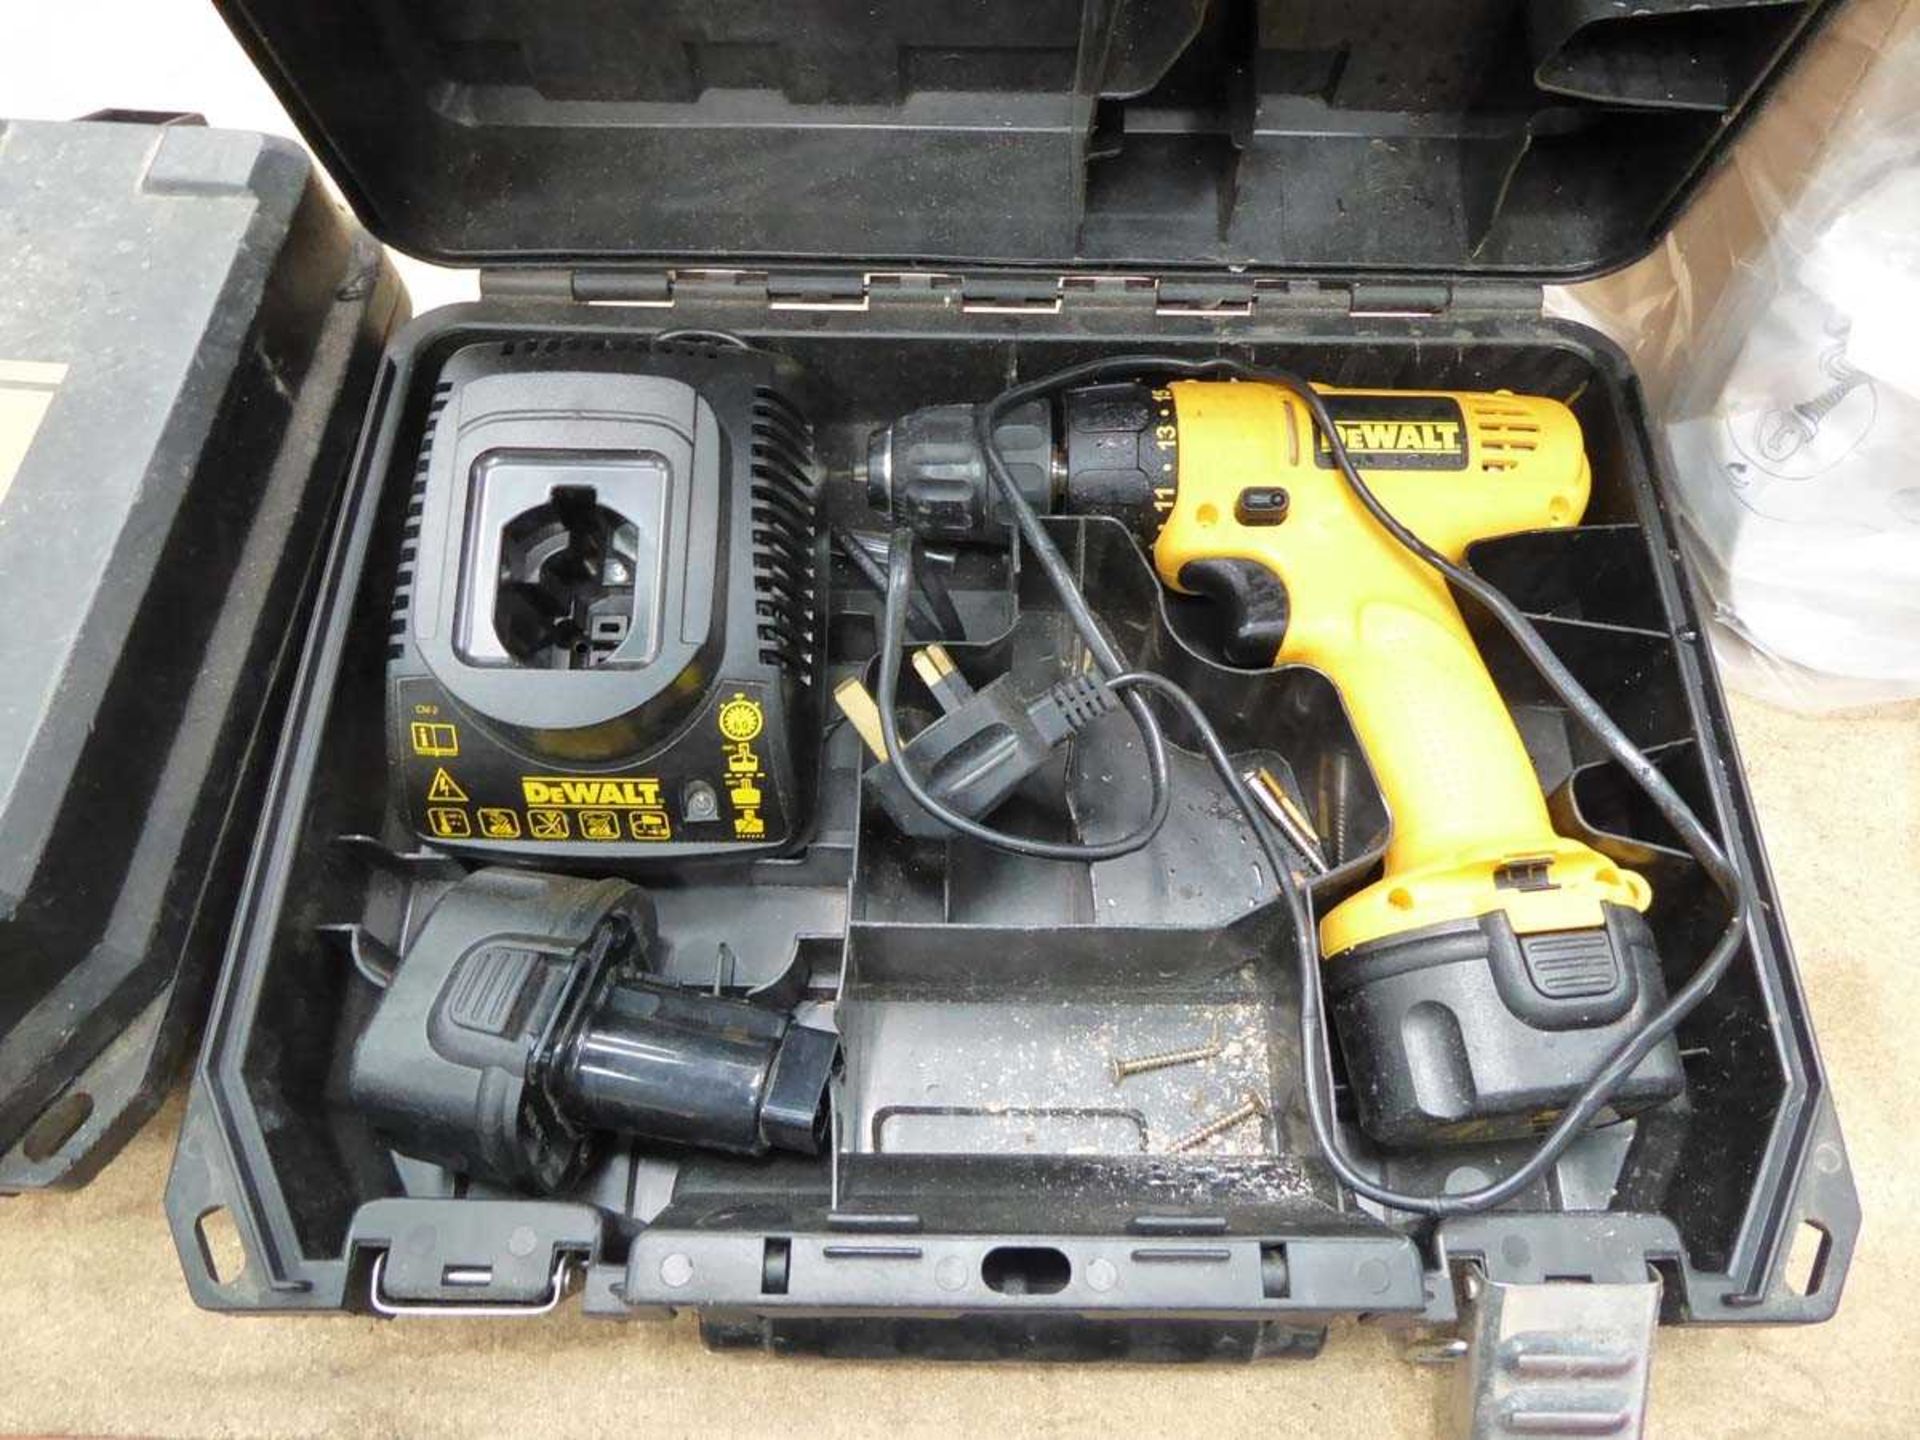 DeWalt battery drill with two batteries and charger